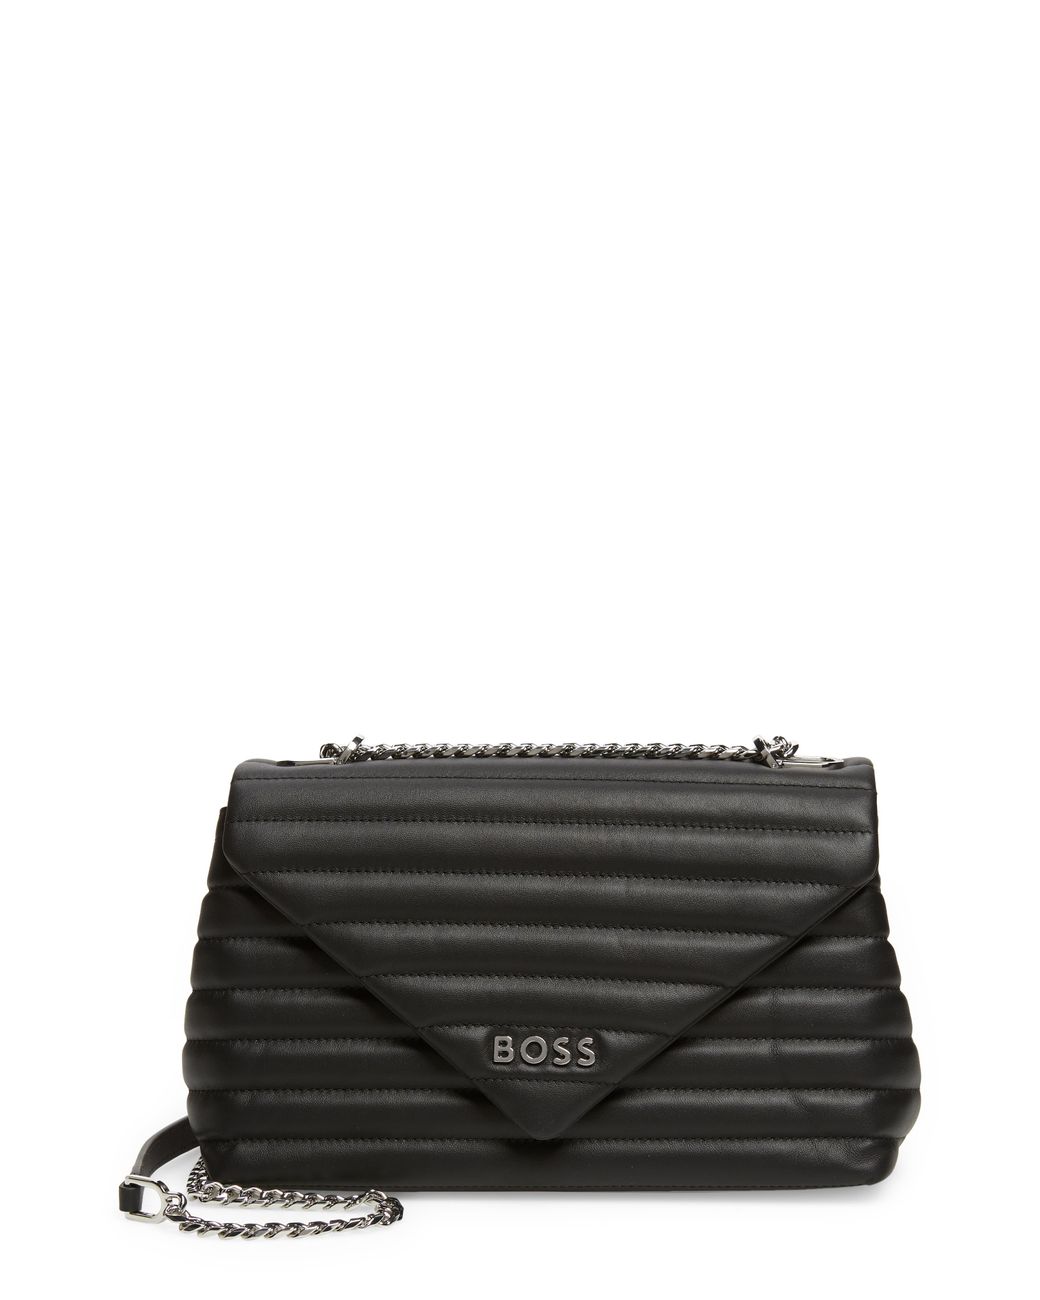 BOSS by HUGO BOSS Ayla Quilted Leather Convertible Shoulder Bag in ...